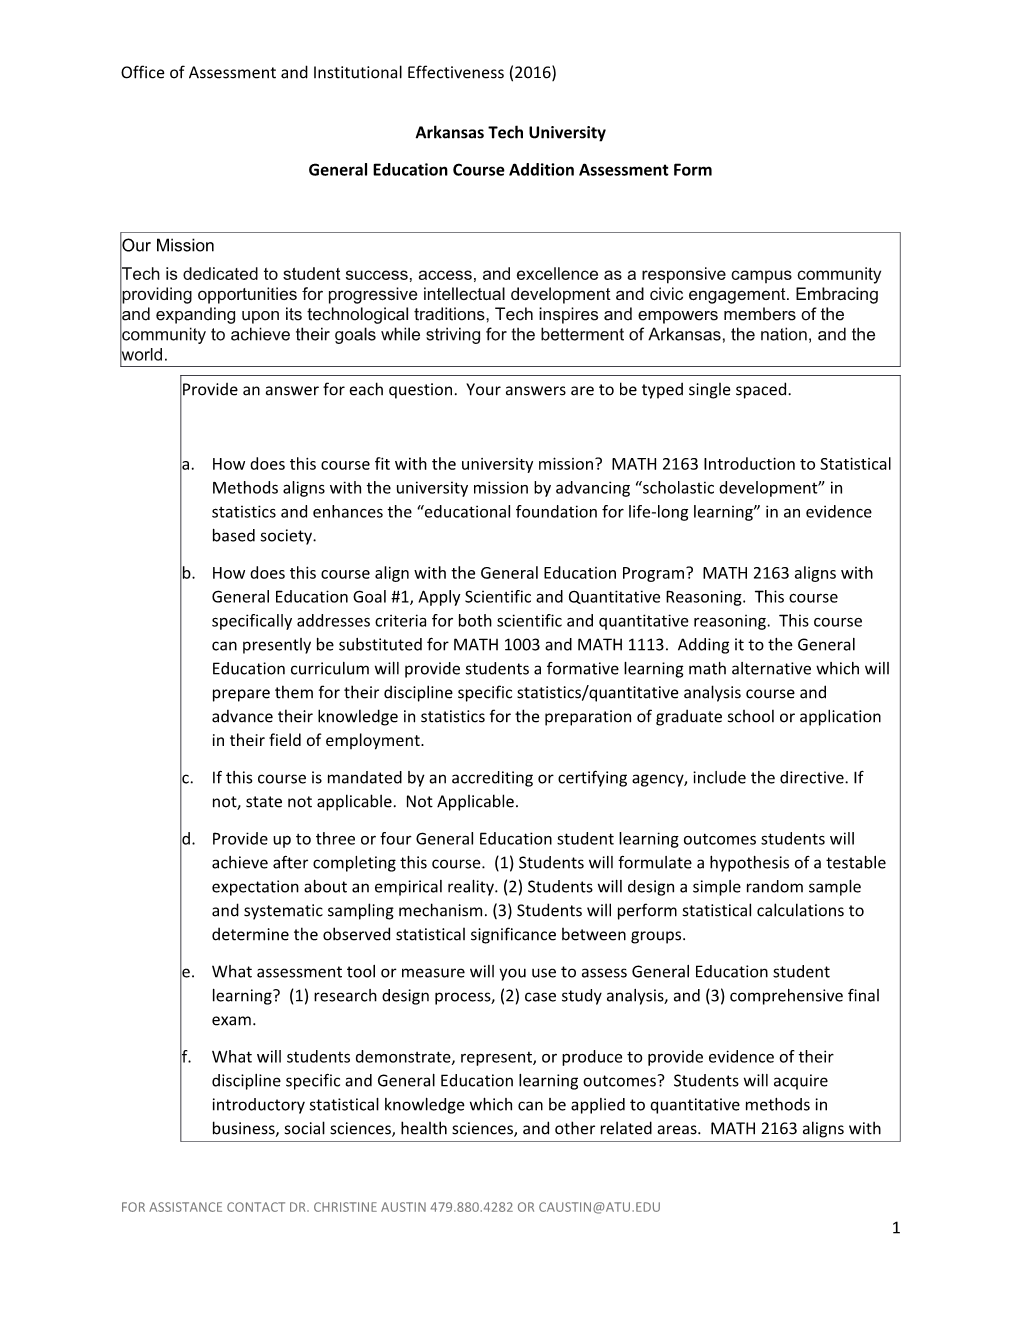 General Education Course Addition Assessment Form